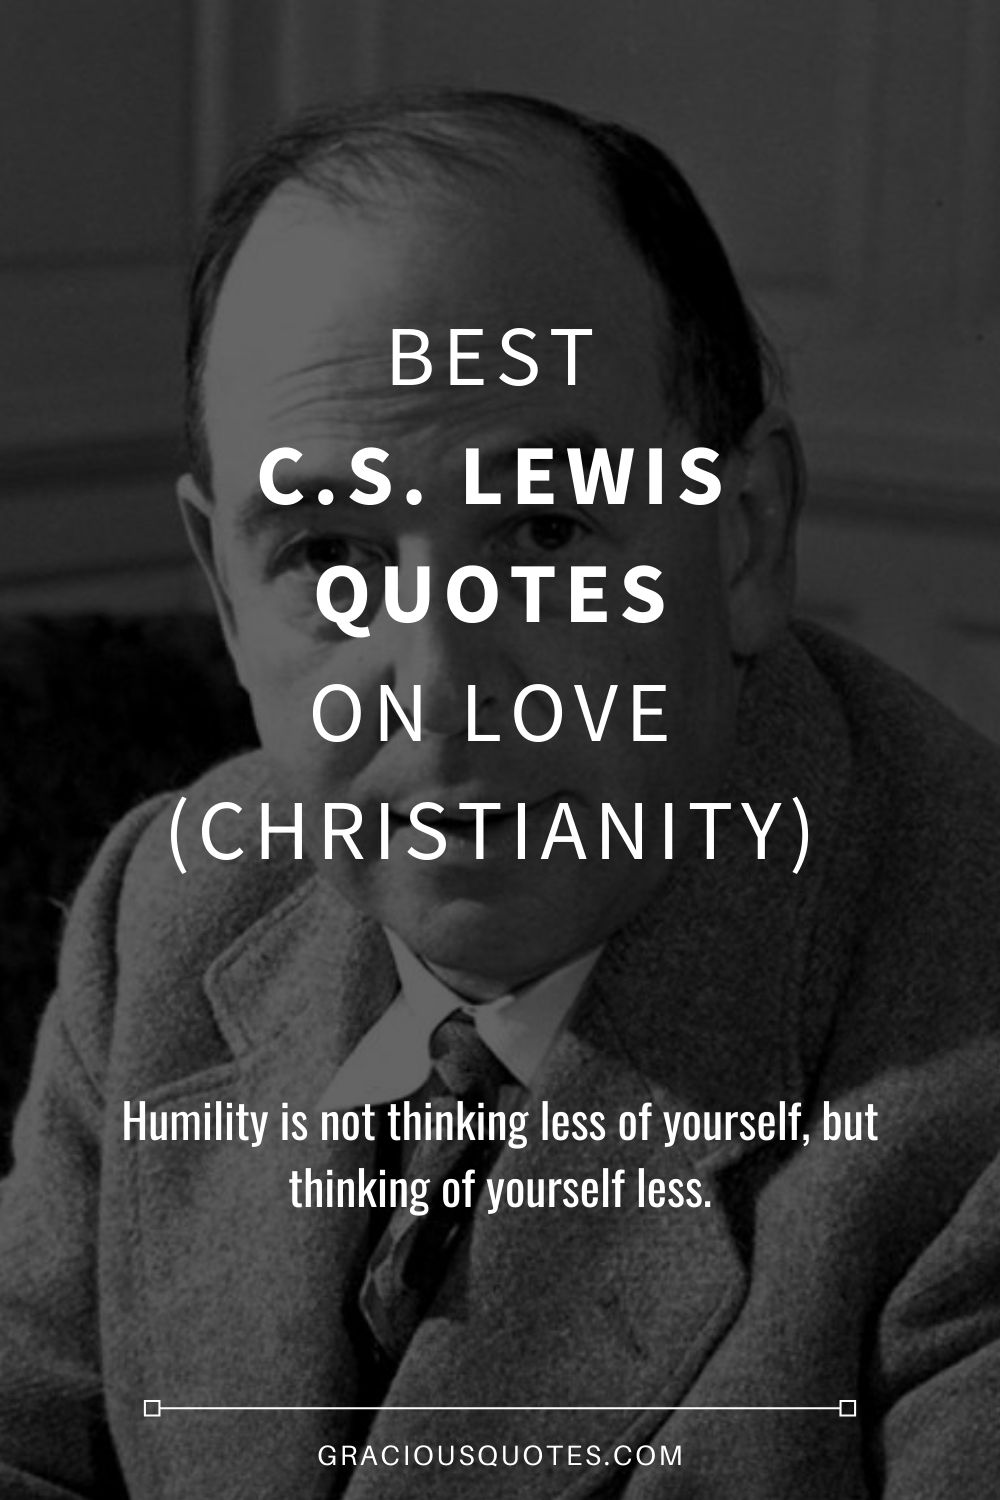 Best C.S. Lewis Quotes on Love (CHRISTIANITY) - Gracious Quotes